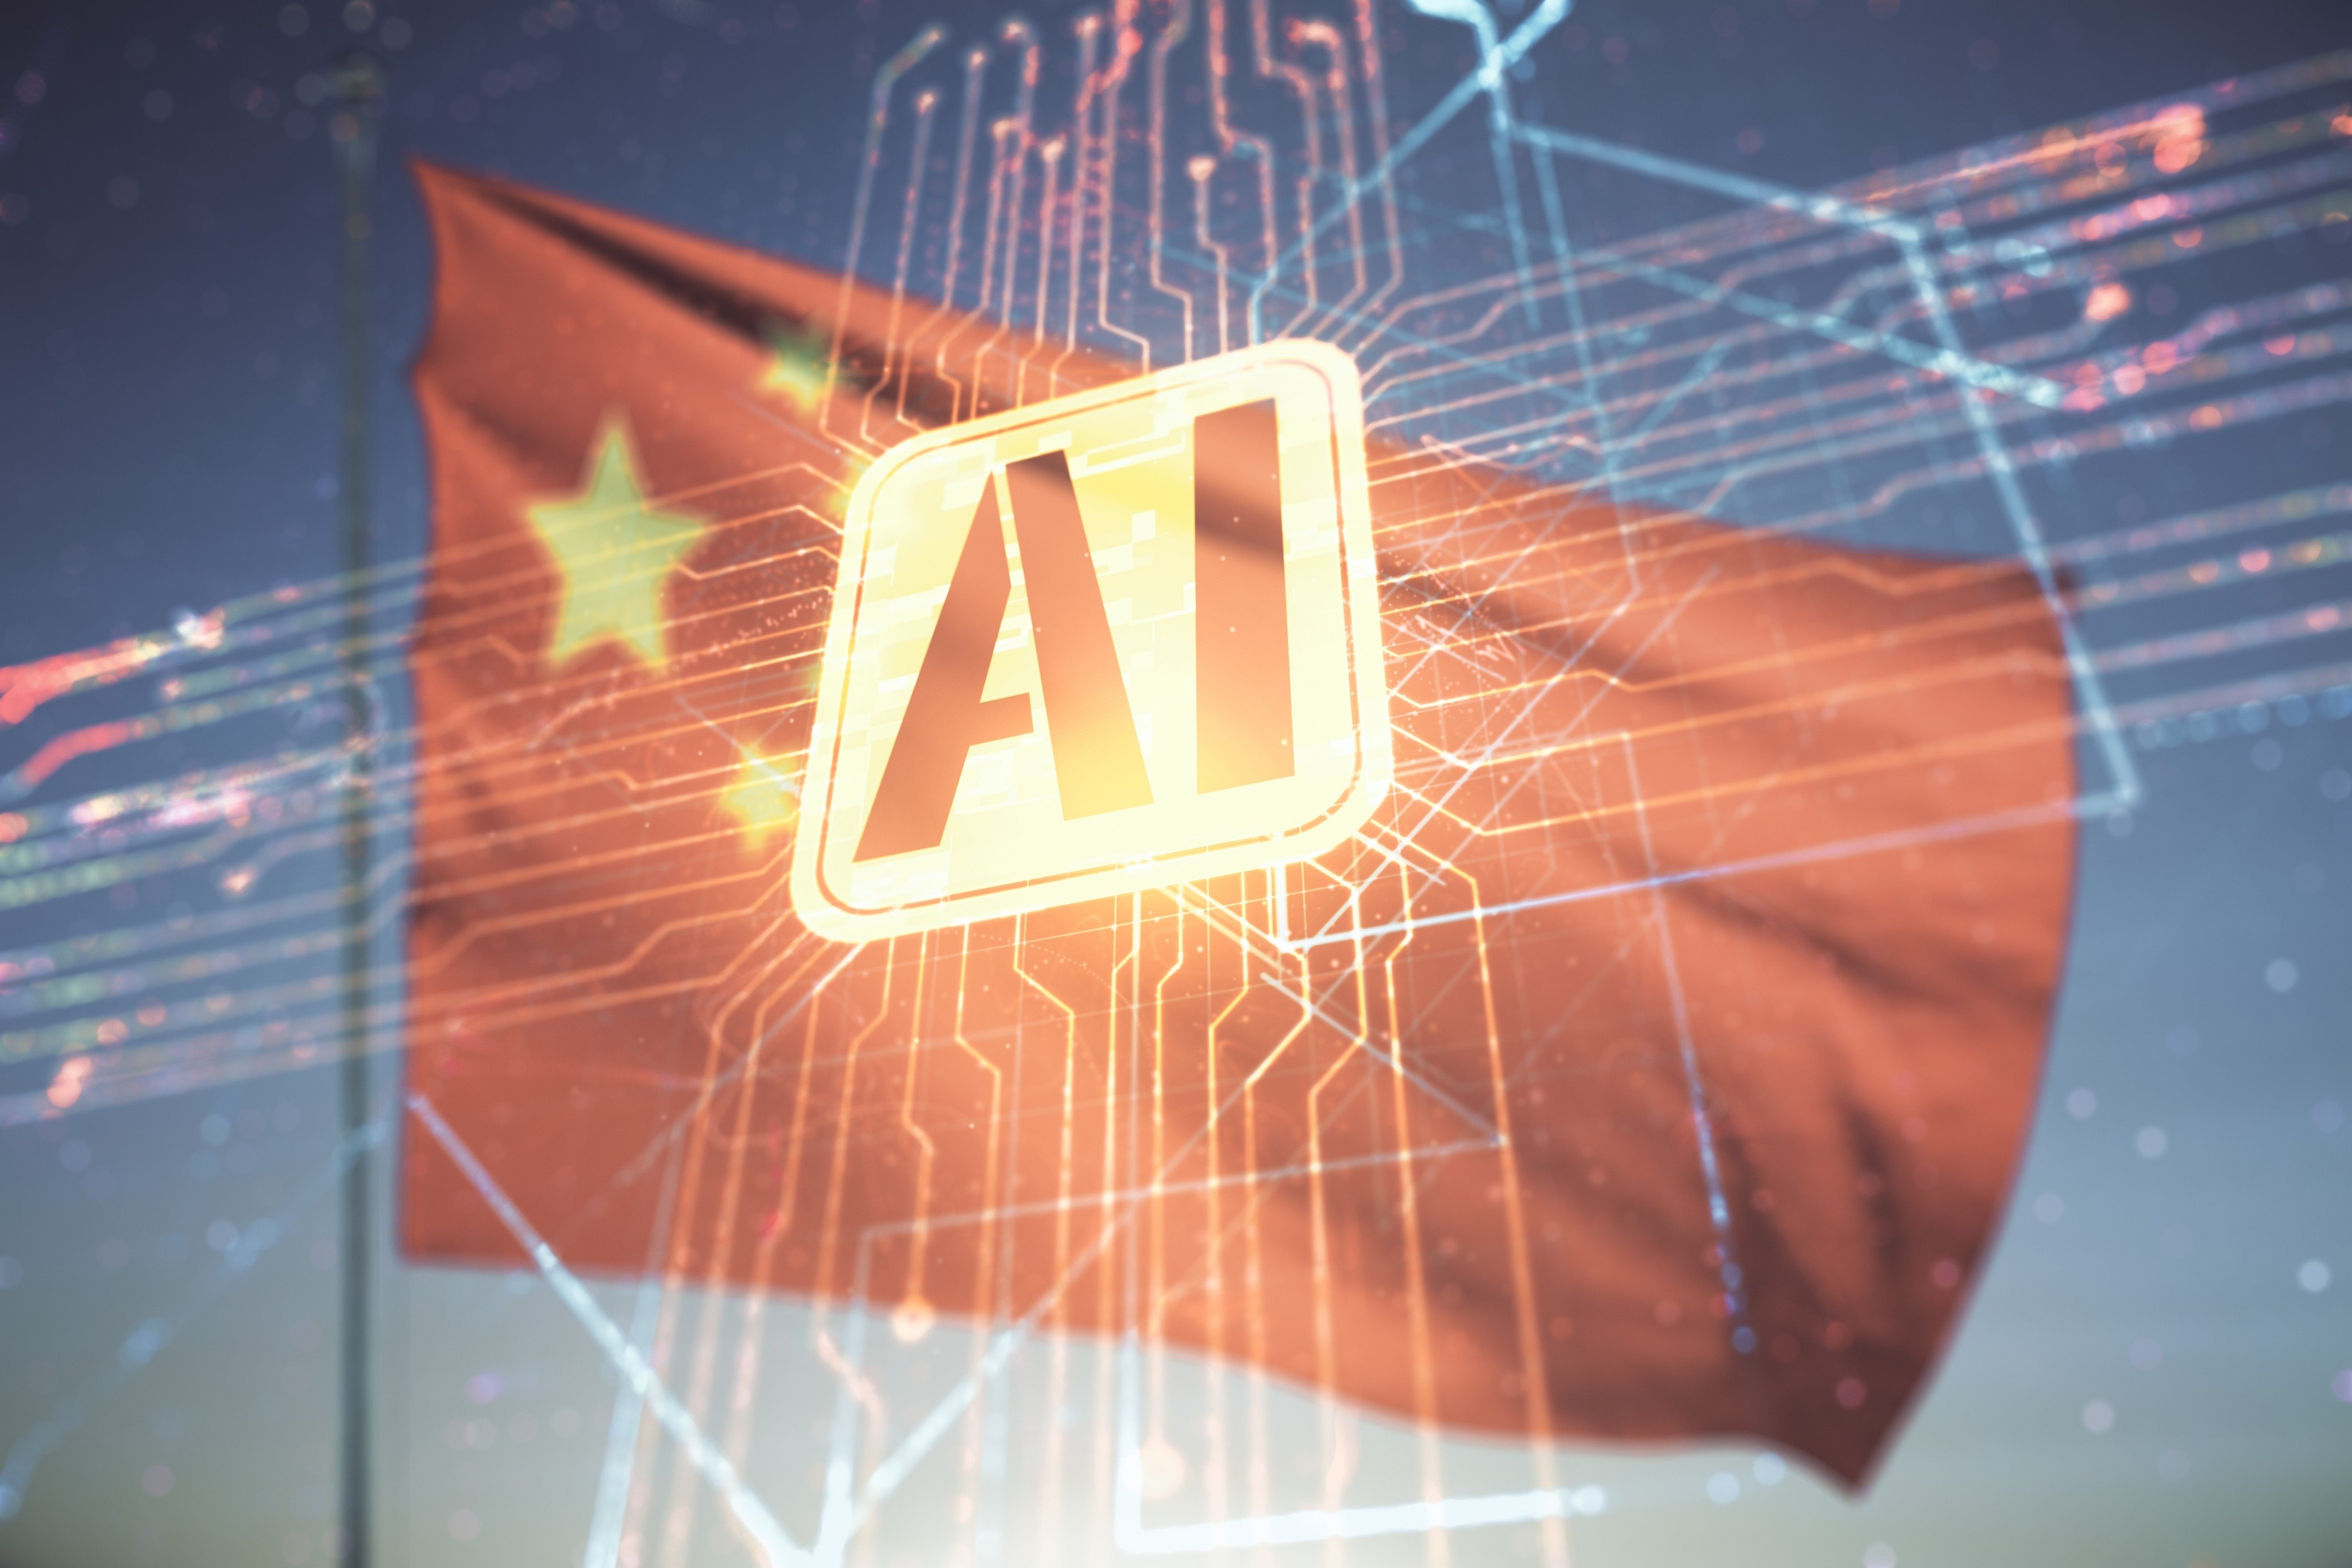 A slew of sanctions imposed by the US since 2019 has forced companies across China’s vast tech supply chain to work closely together in supporting domestic artificial intelligence projects. Image: Shutterstock